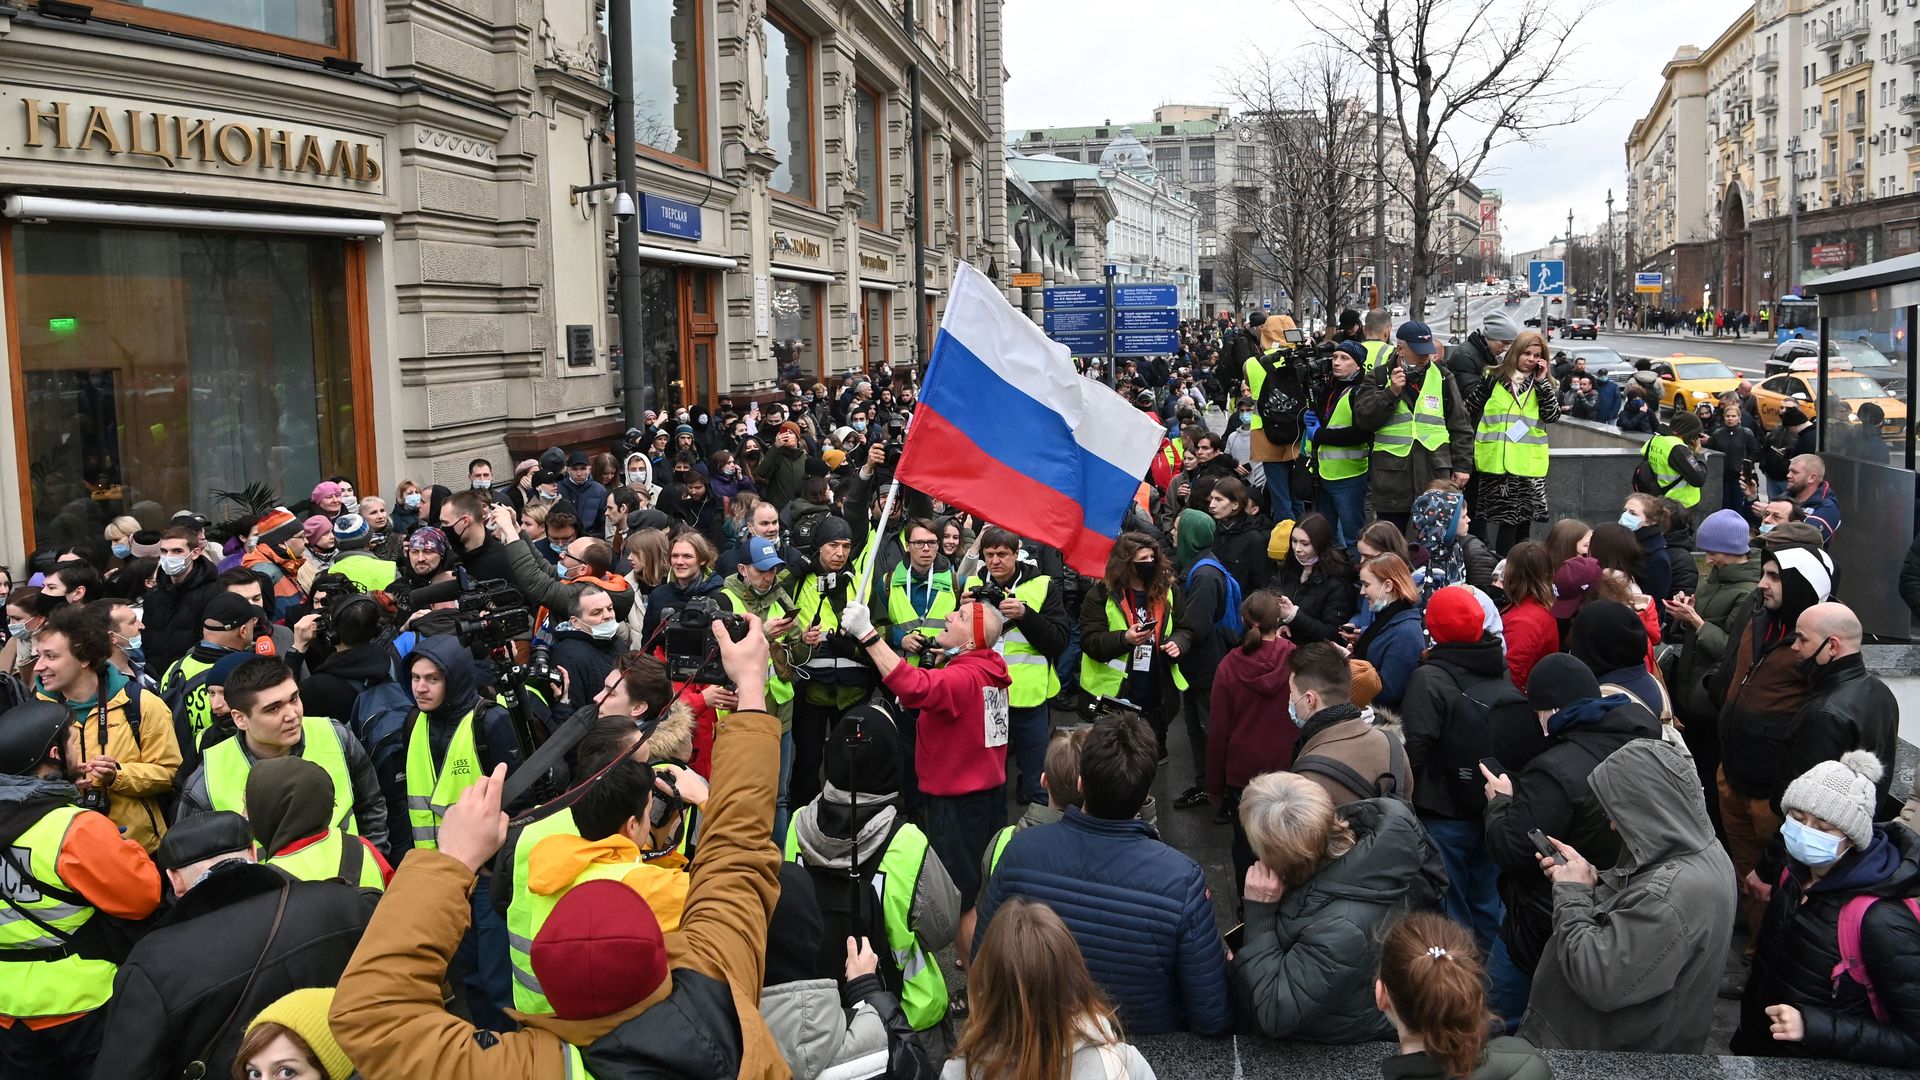  Opposition supporters attend a rally in support of jailed Kremlin critic Alexei Navalny, in central Moscow on April 21